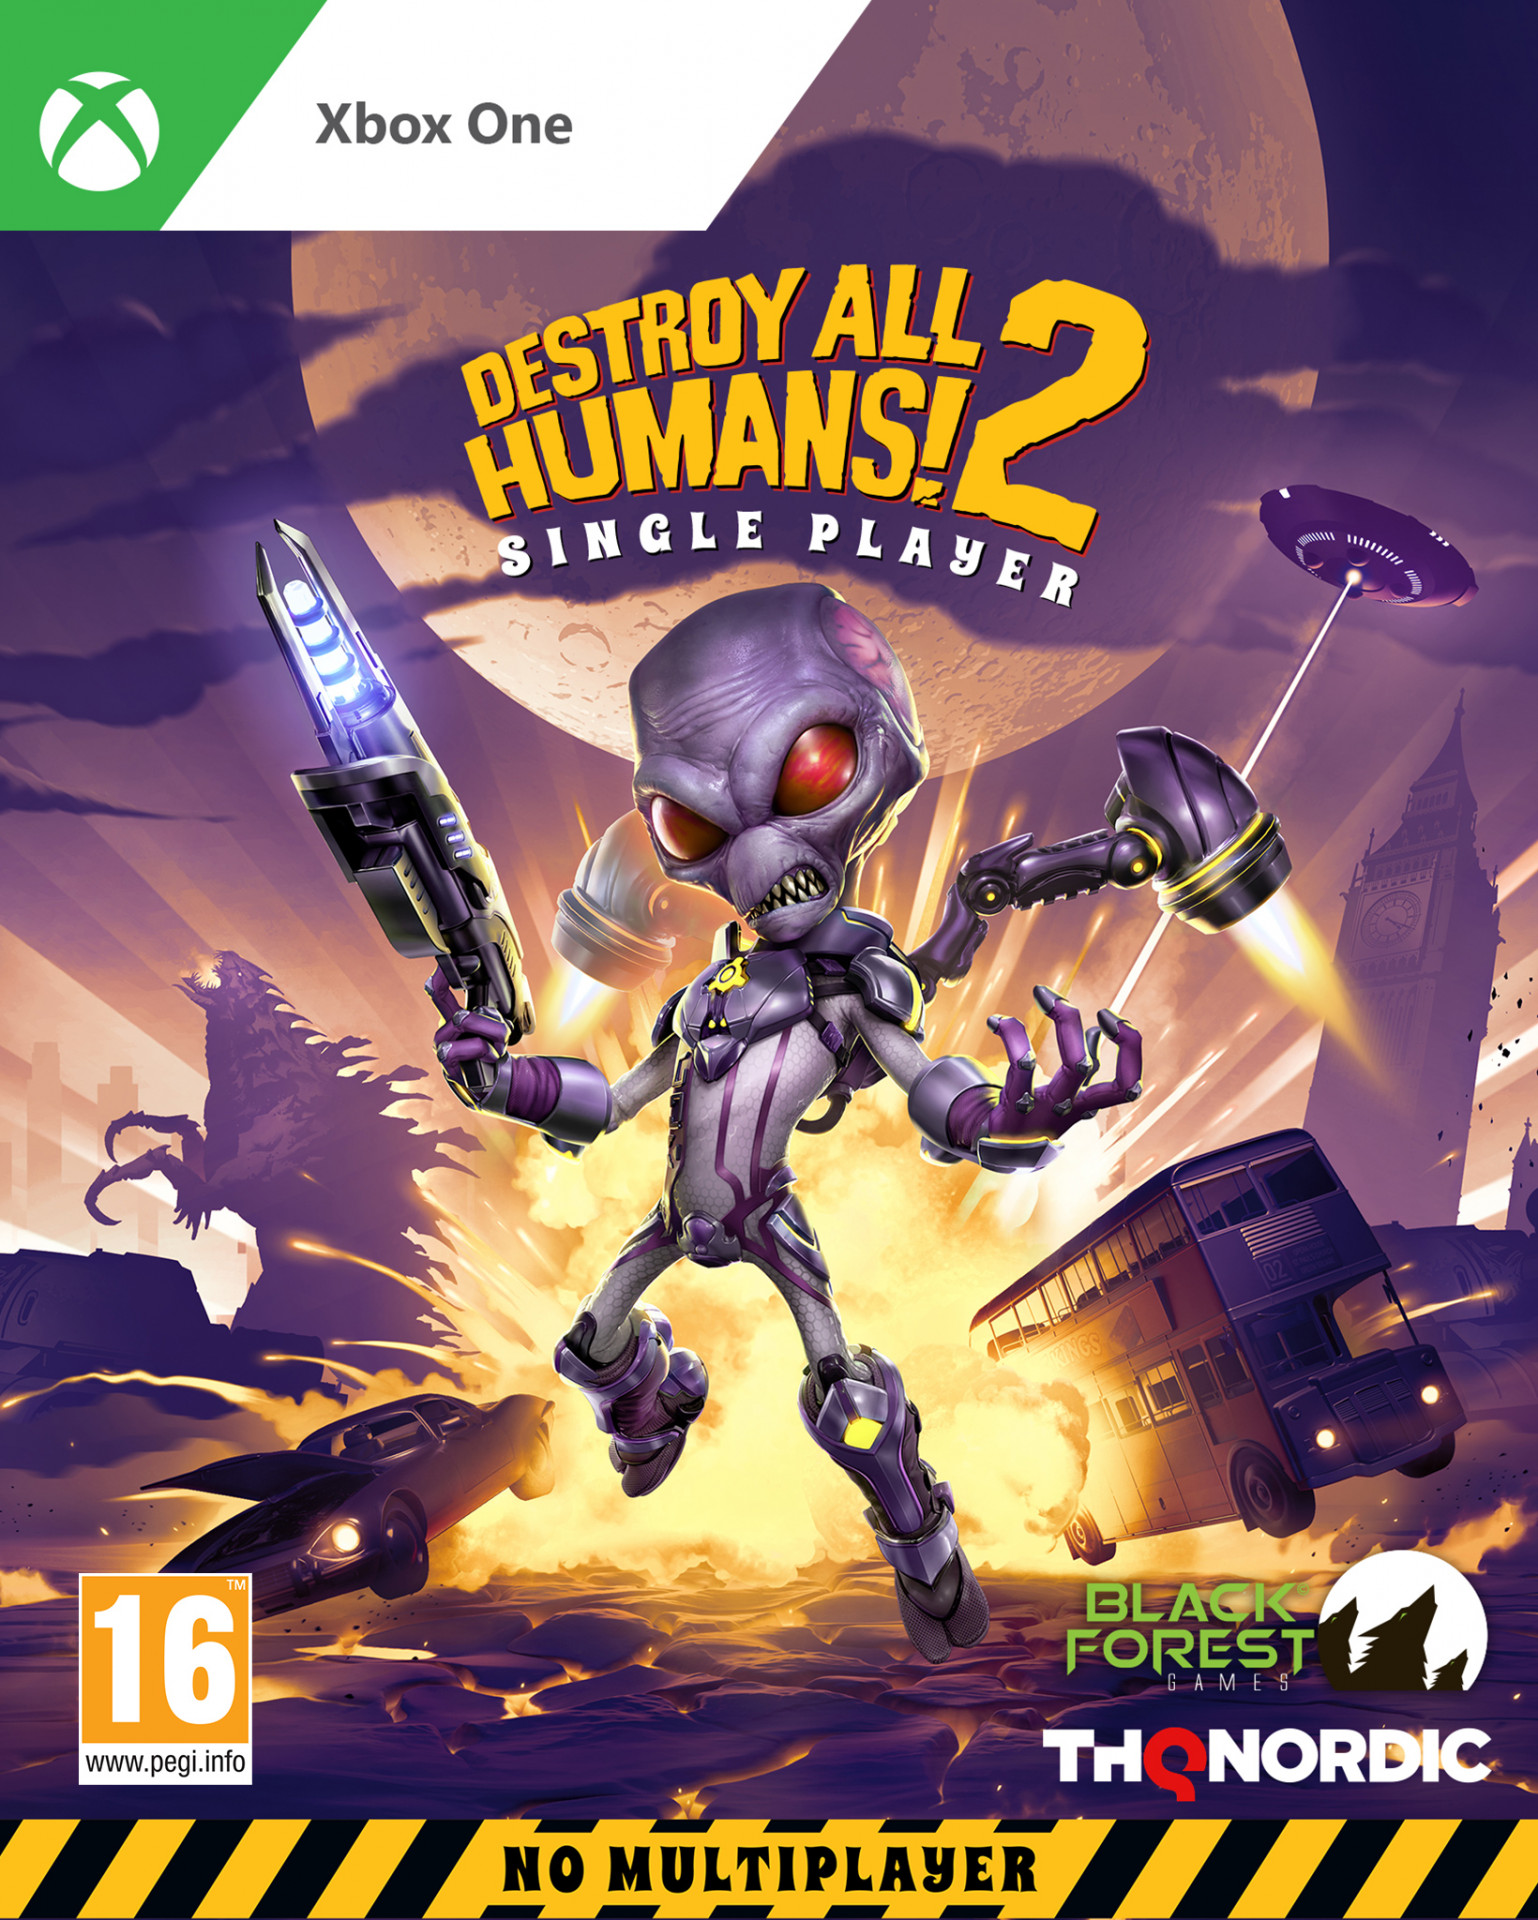 Destroy All Humans 2 - Single Player Edition (Xbox One), Black Forest